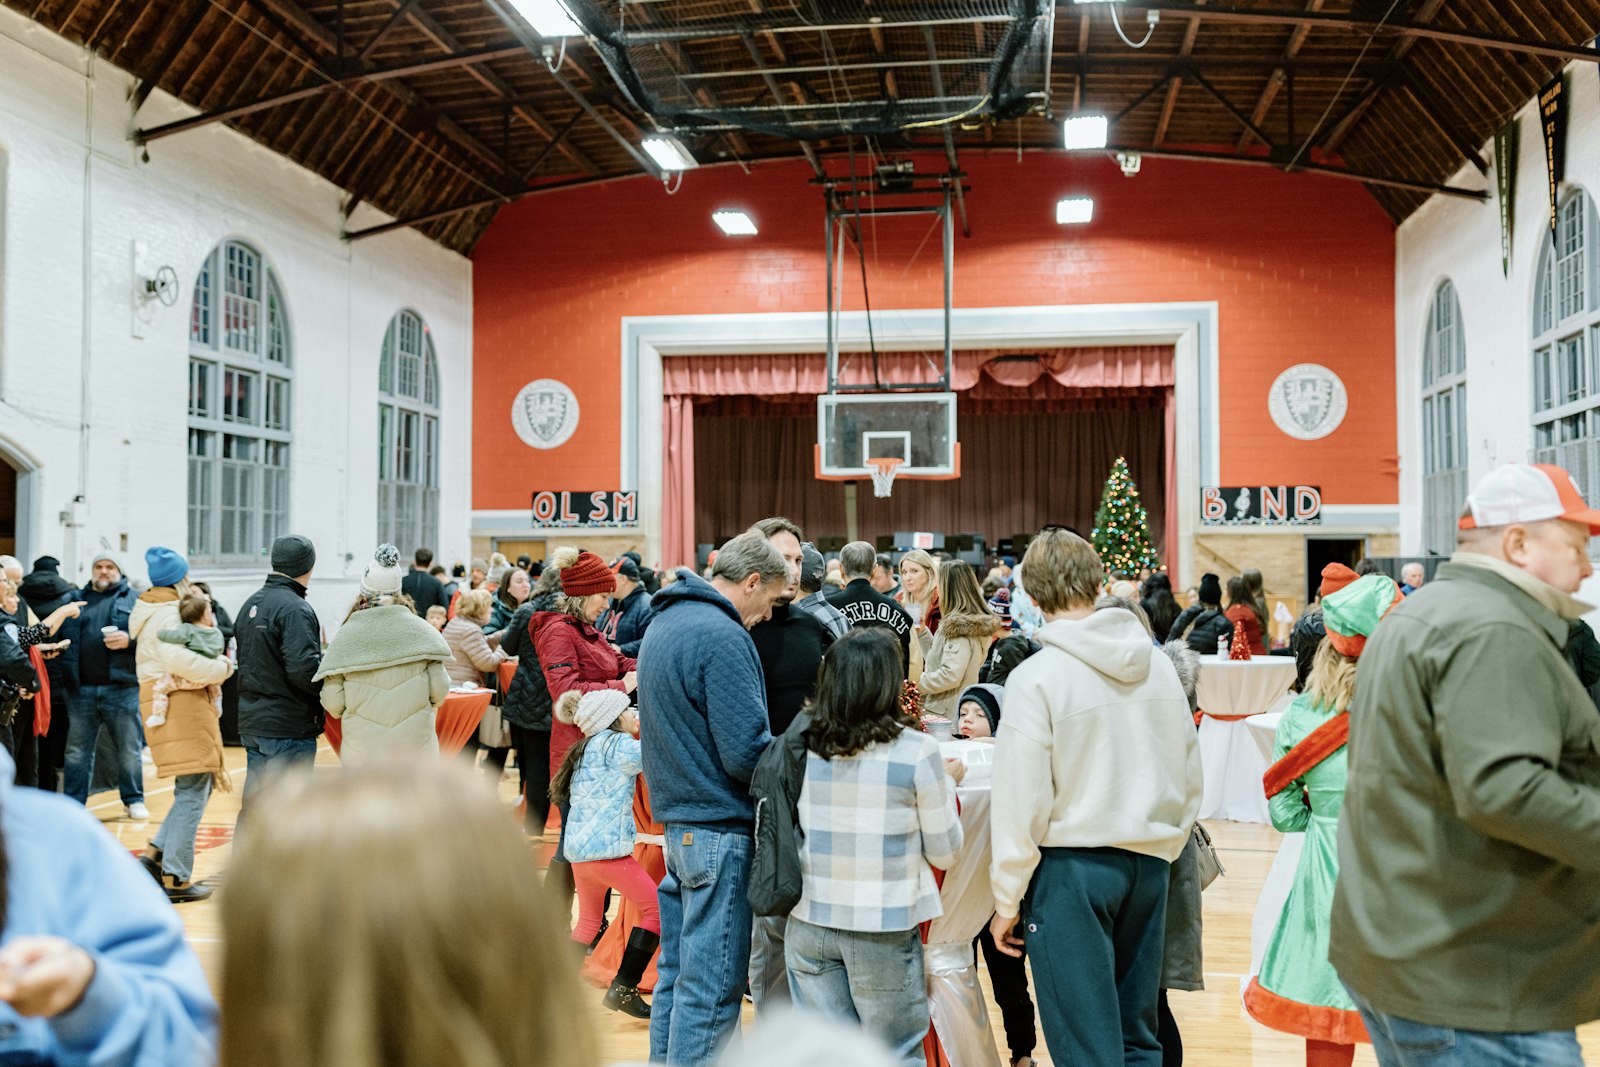 Families gather for the annual event, which brings together current and alumni students and families to celebrate the holidays and the impact of the Orchard Lake Schools. (Alissa Tuttle | Special to Detroit Catholic)